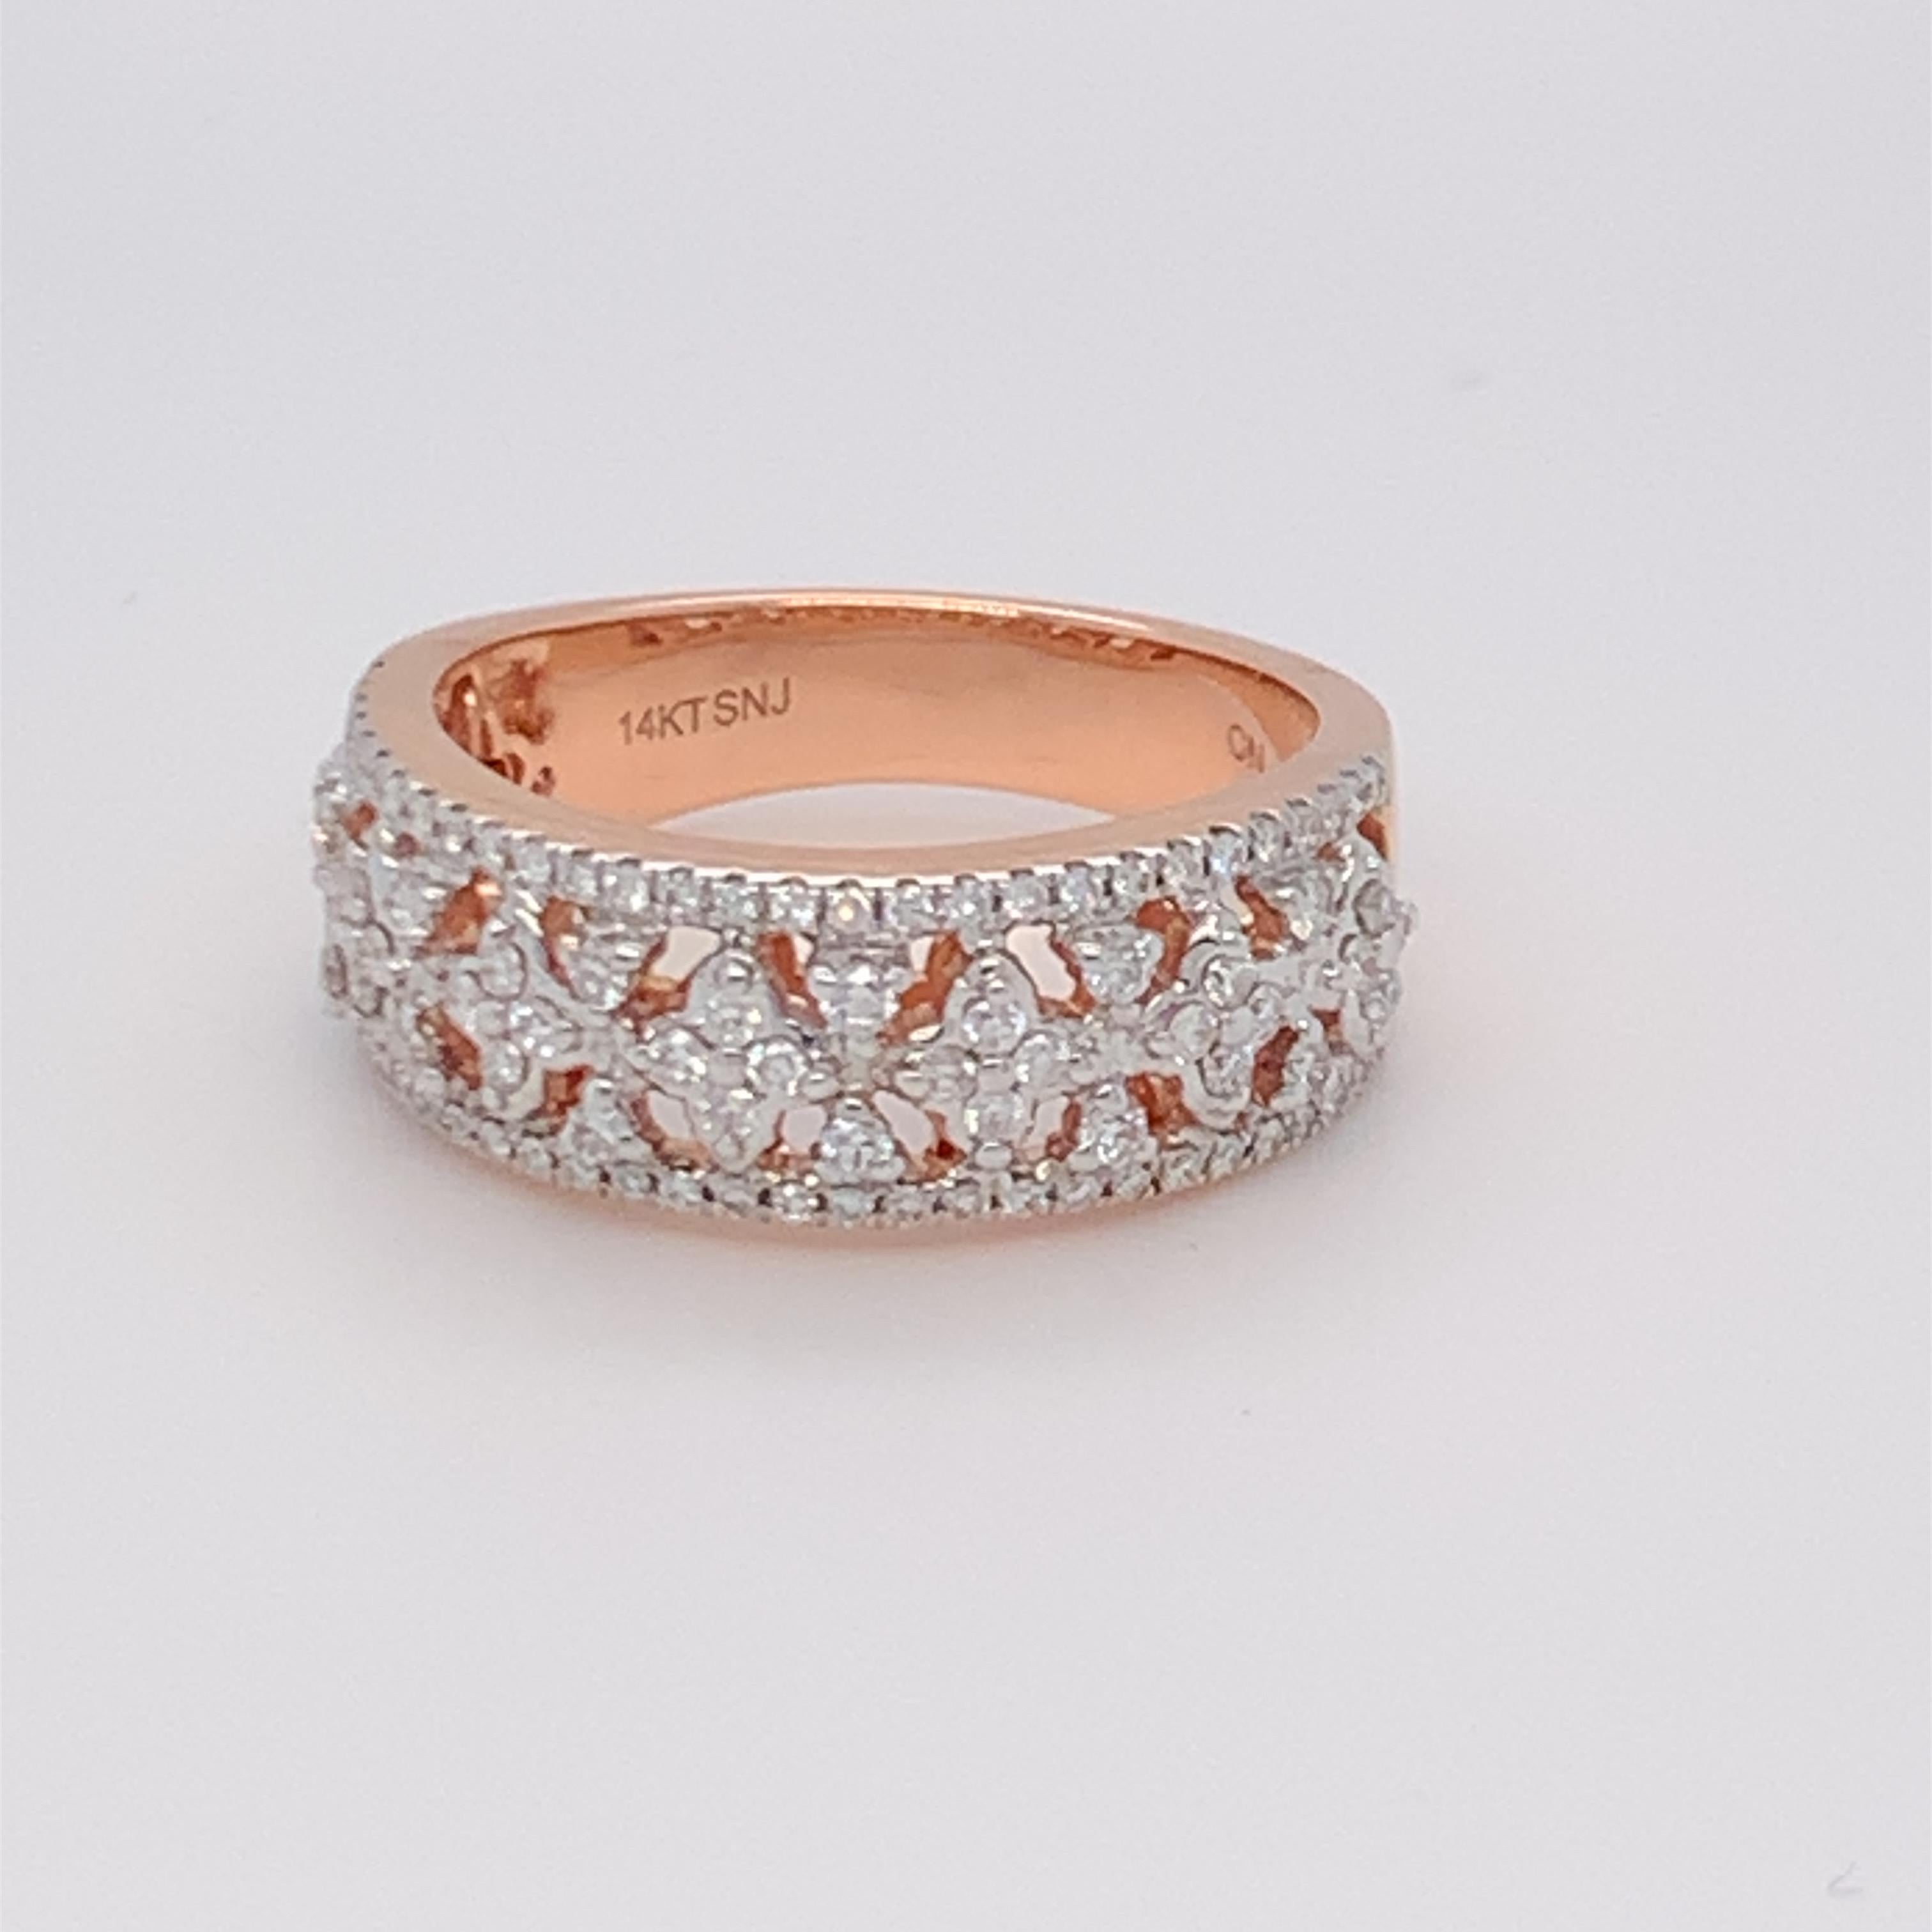 This beautiful white diamond band is carefully finished with hand by skilled craftsmen and mounted in 14K rose gold.  
White Diamond: 0.50ct
Gold: 14K Rose
Size: 7